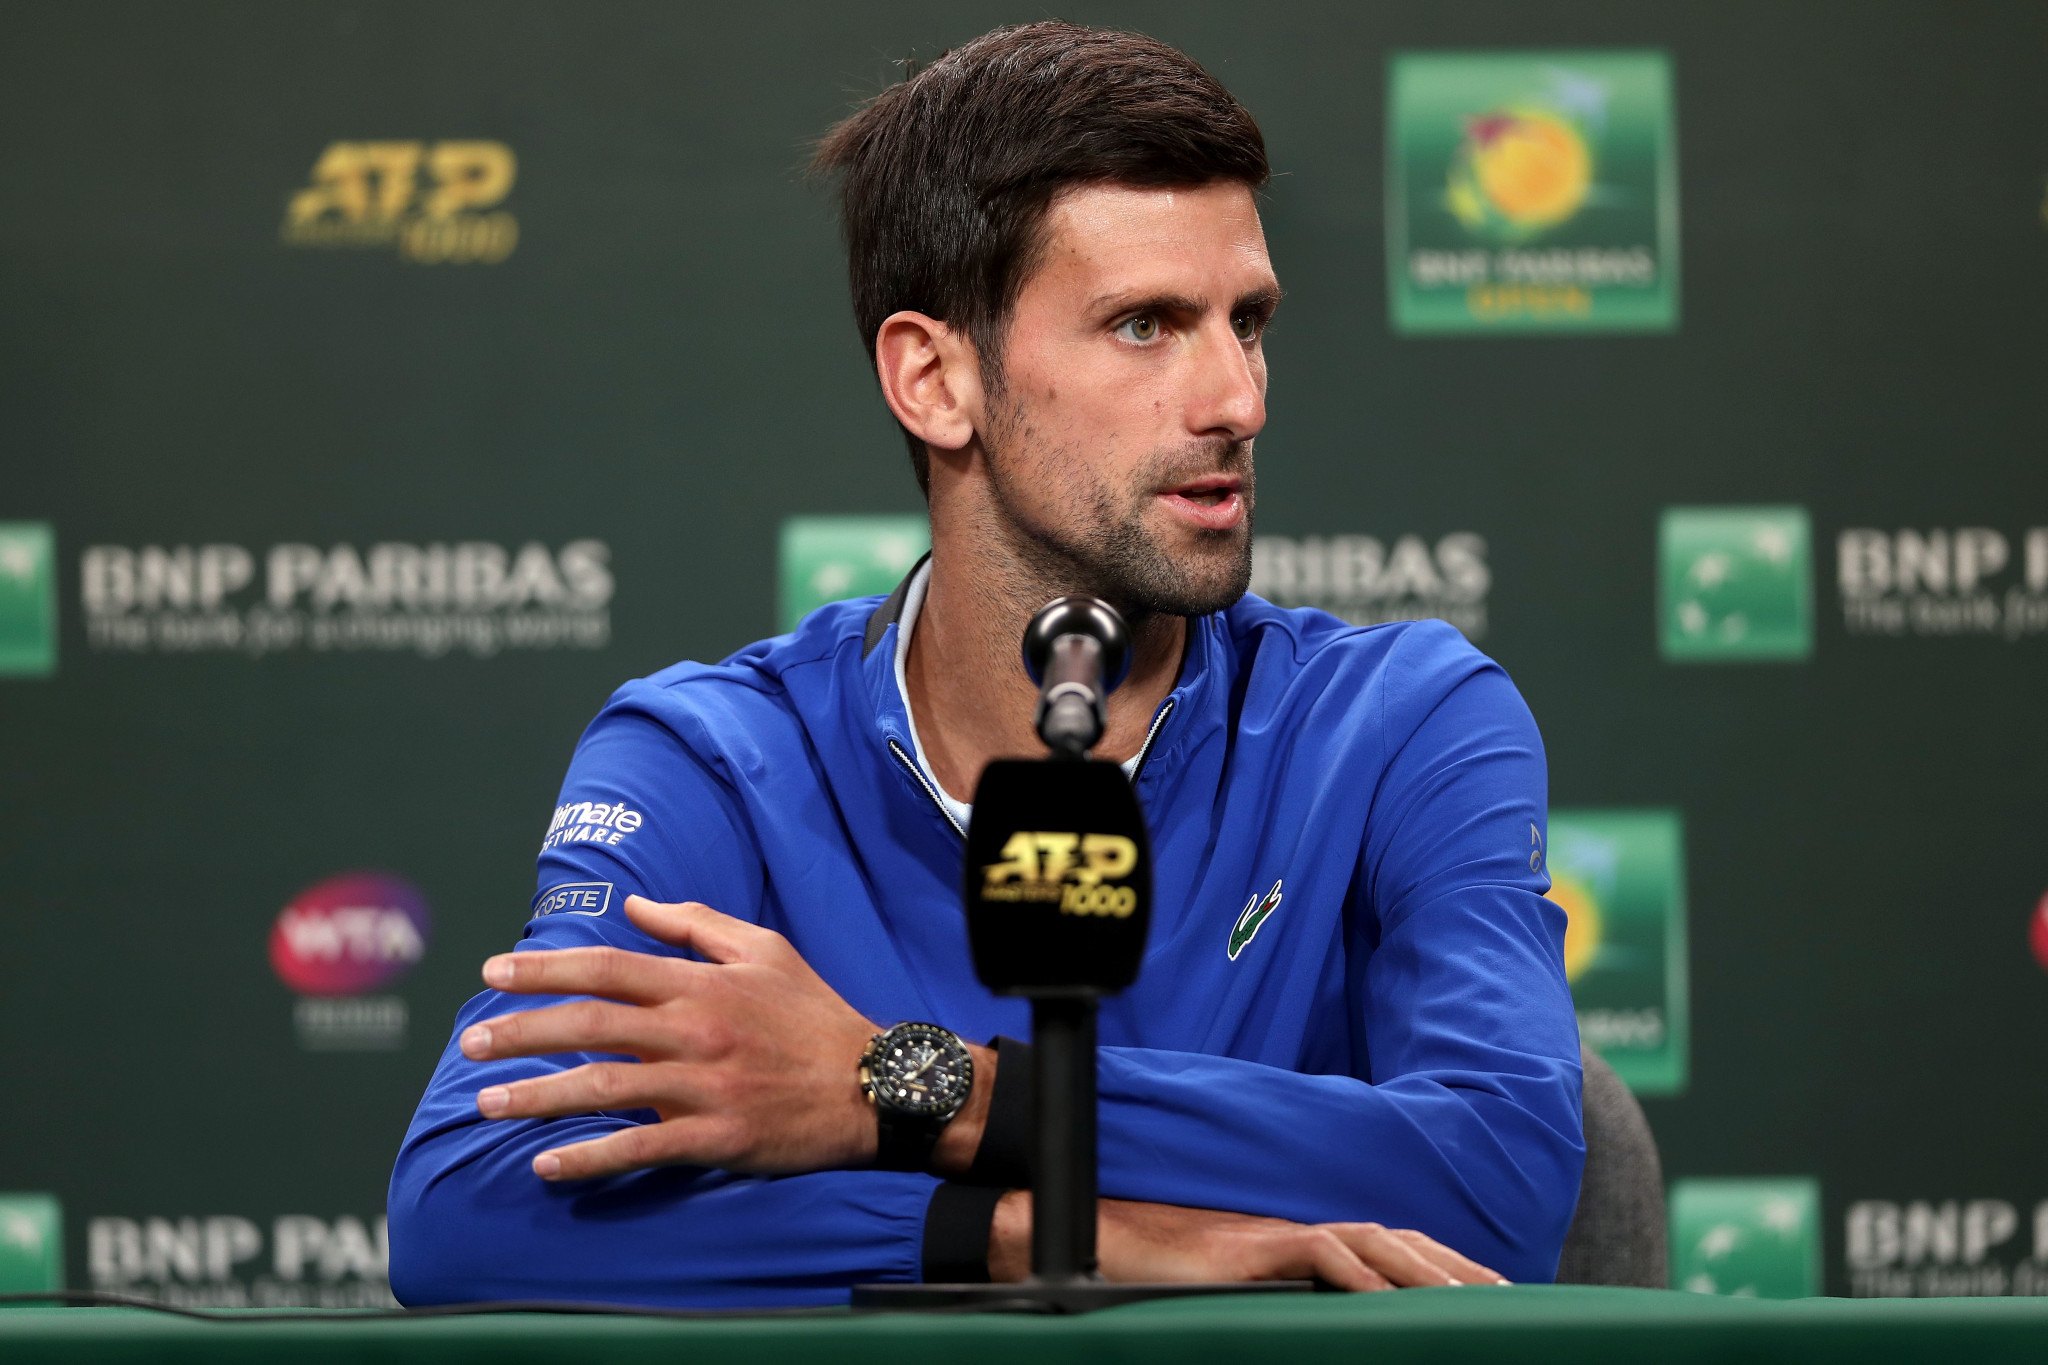 Speaking in Indian Wells Novak Djokovic refused to say whether he backed Chris Kermode's removal ©Getty Images